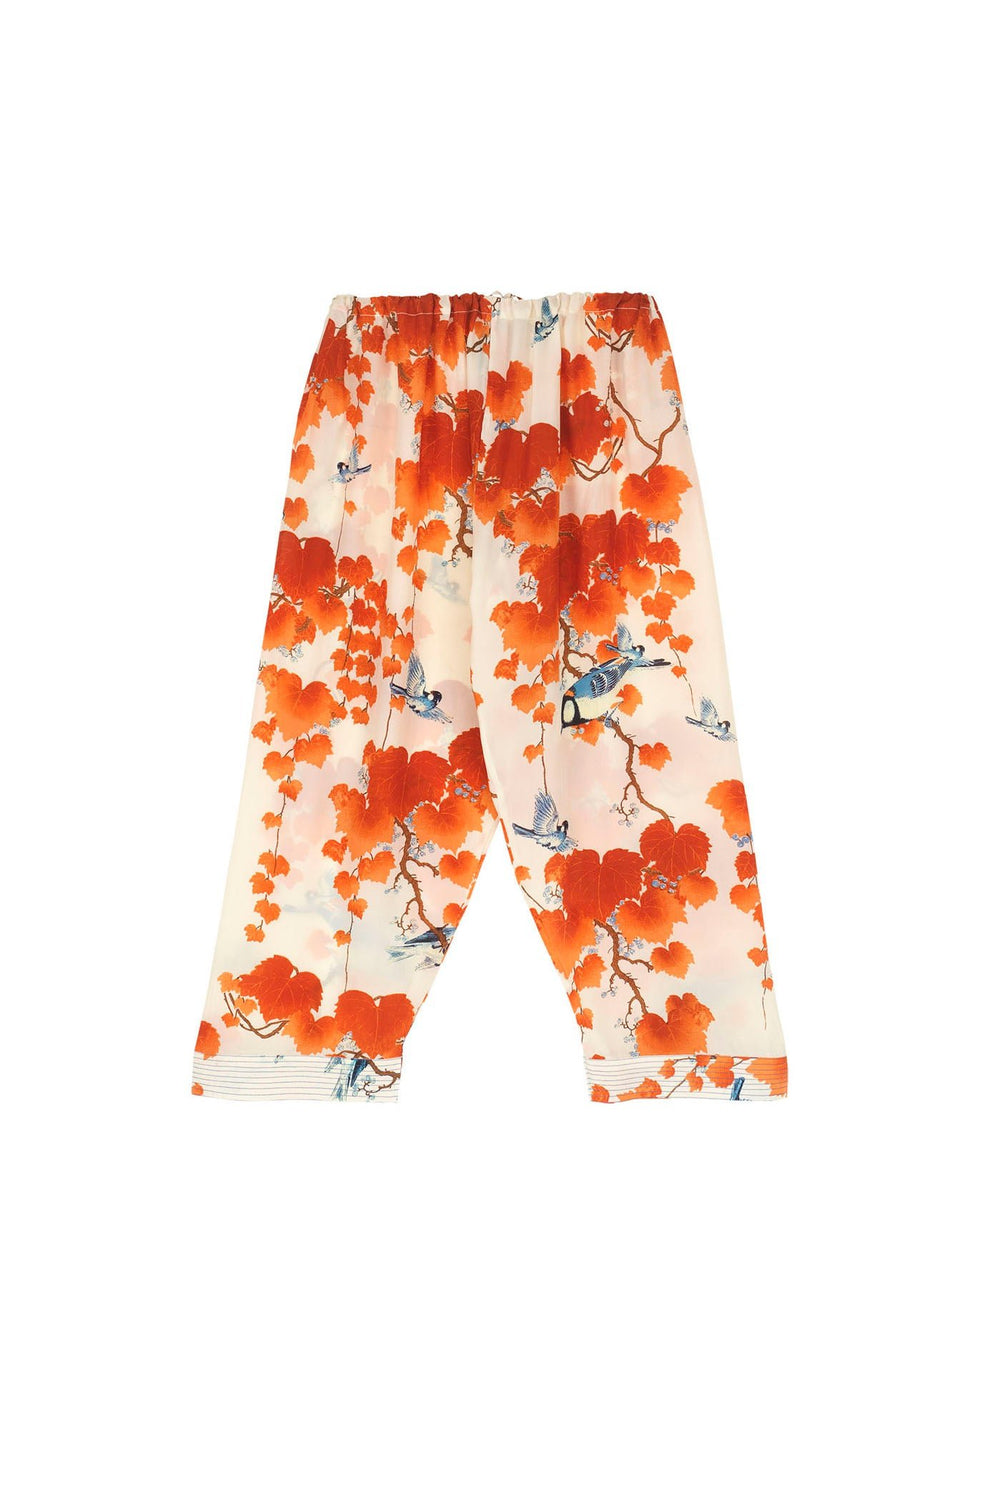 Acer Red Crepe Lounge Pants - One Hundred Stars